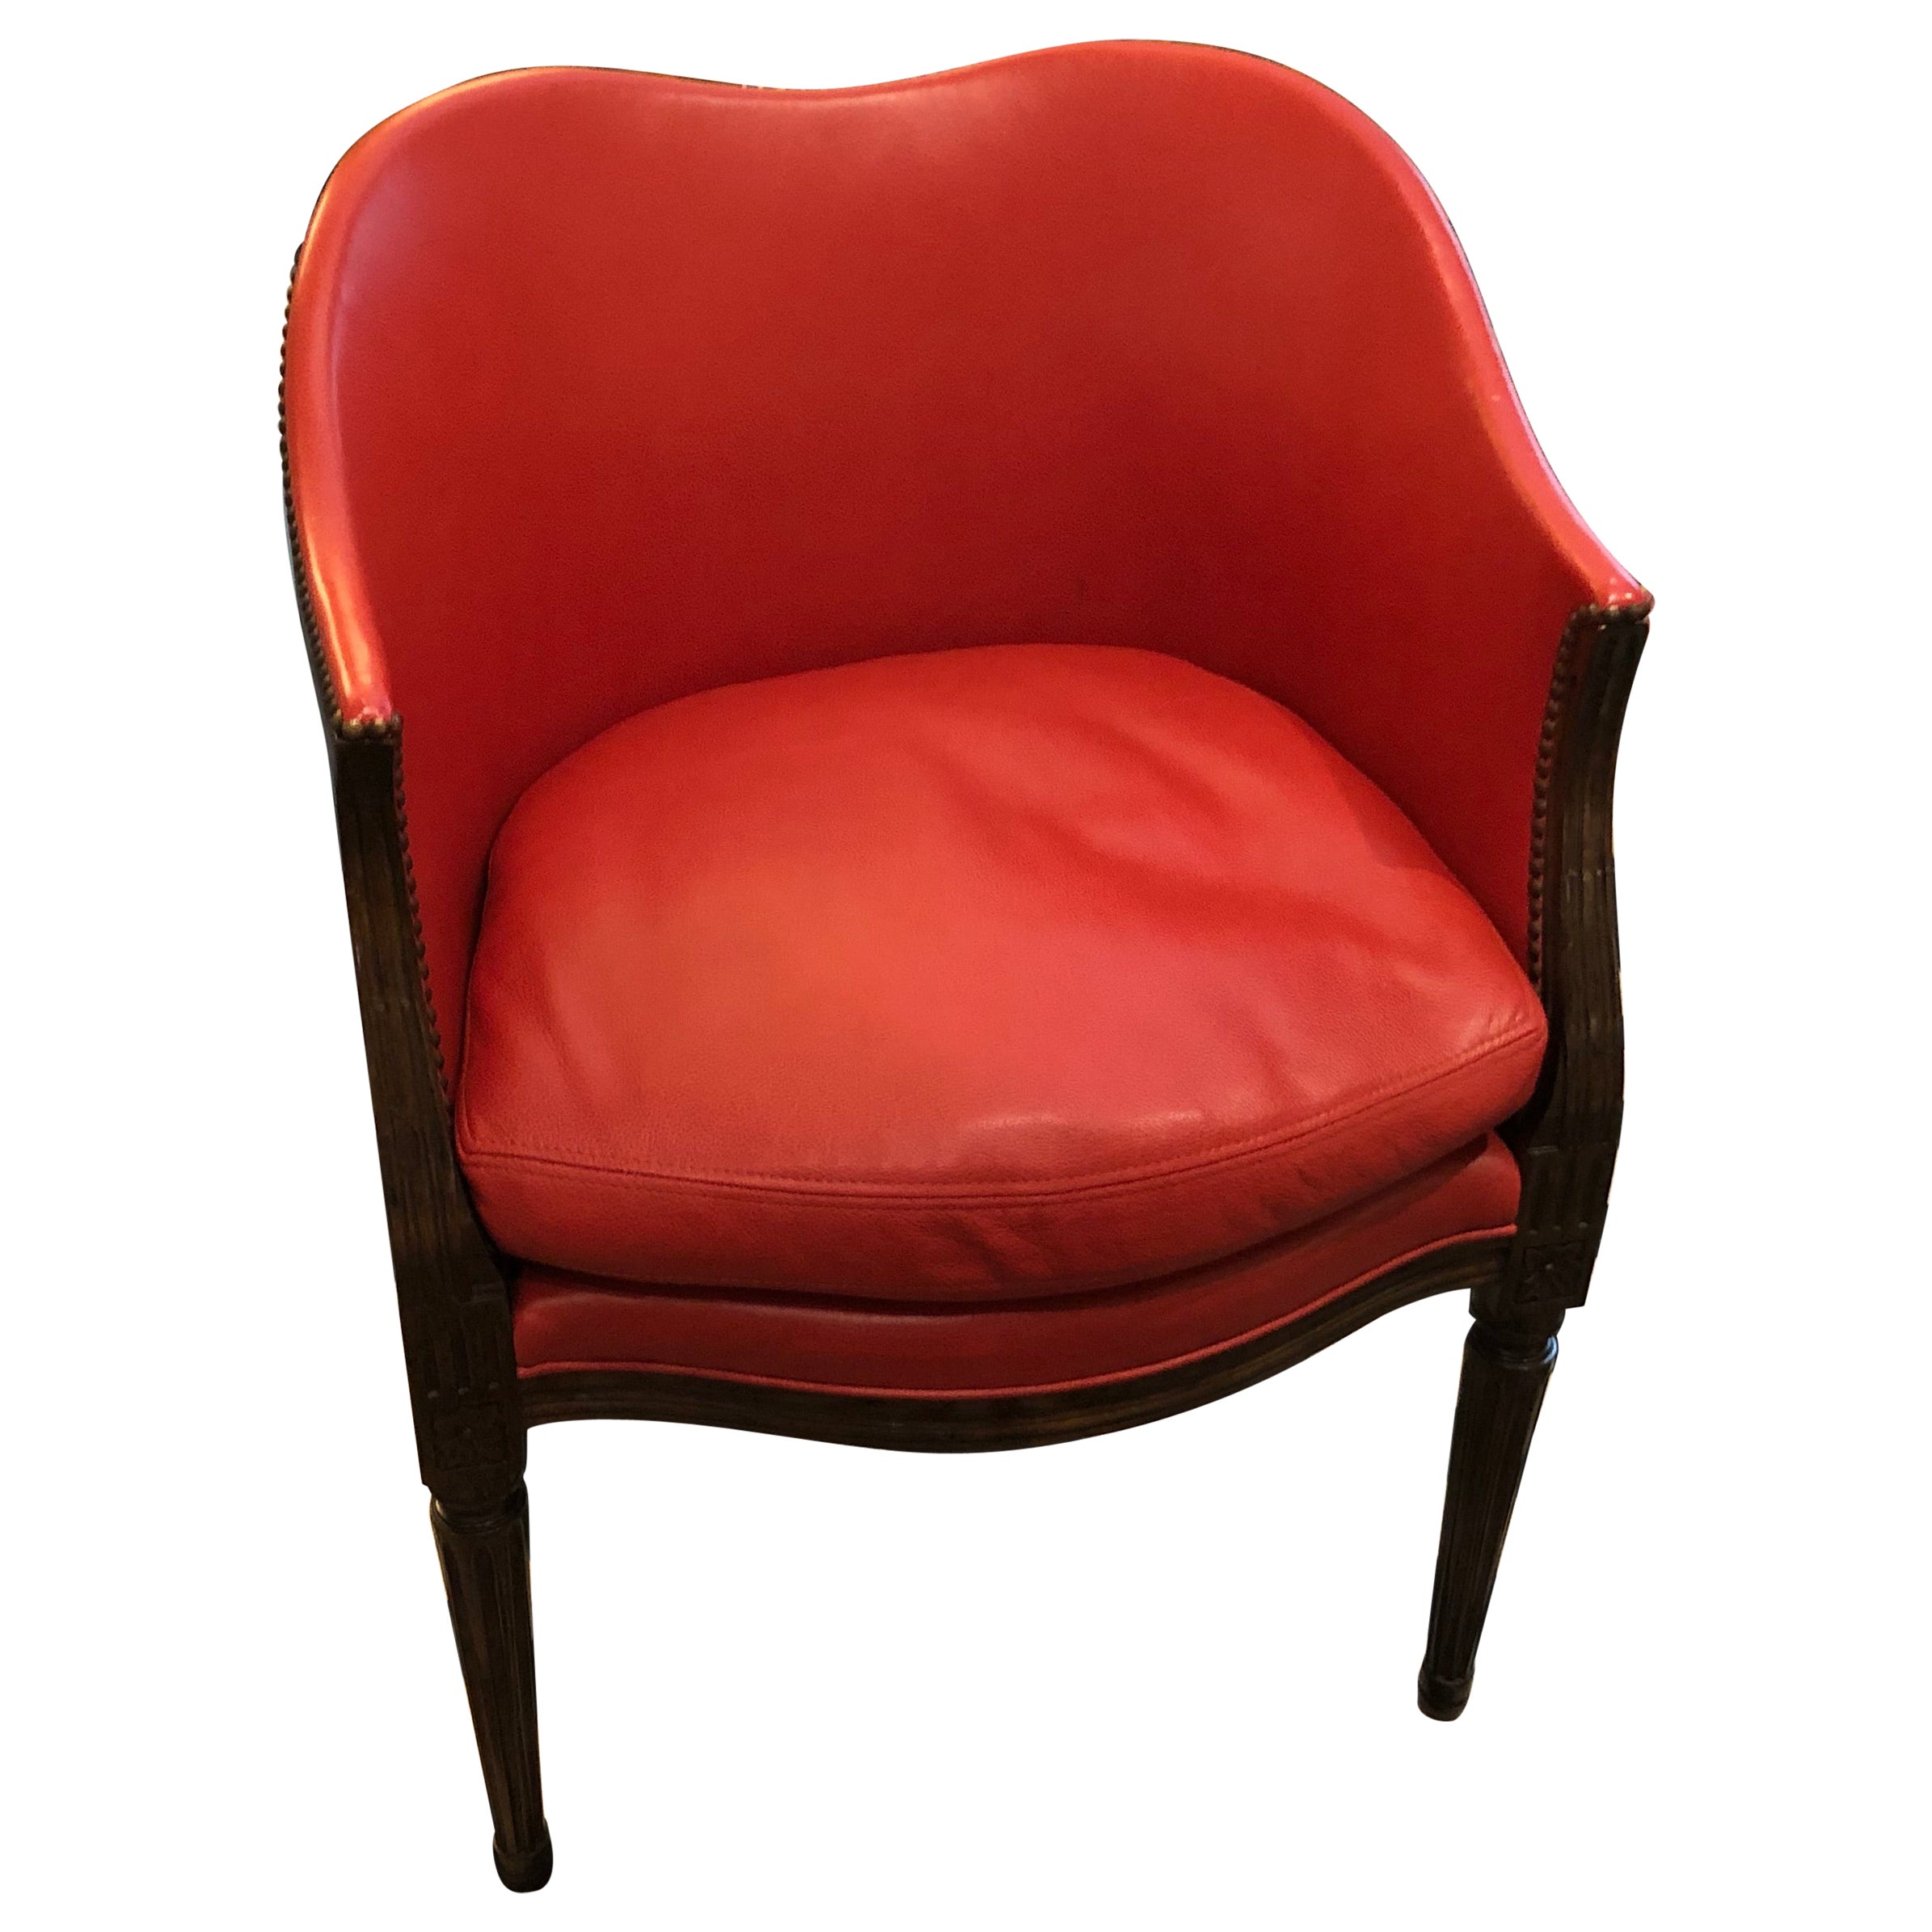 Designer Gregorius Pineo French Style Burnt Orange Leather and Caned Tub Chair For Sale